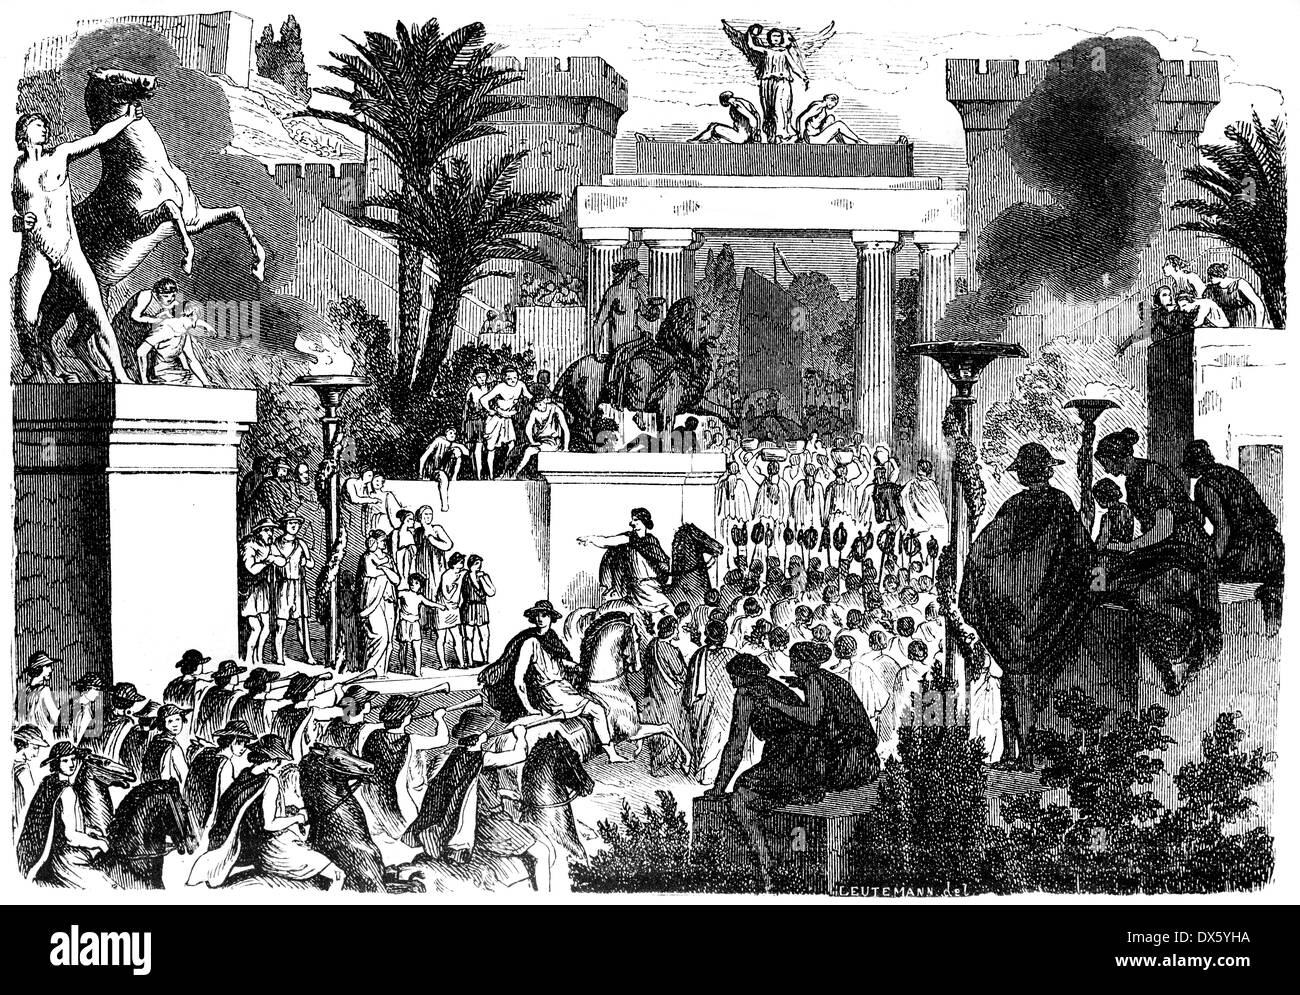 Holiday demonstration in ancient Greece, illustration from book dated 1878 Stock Photo